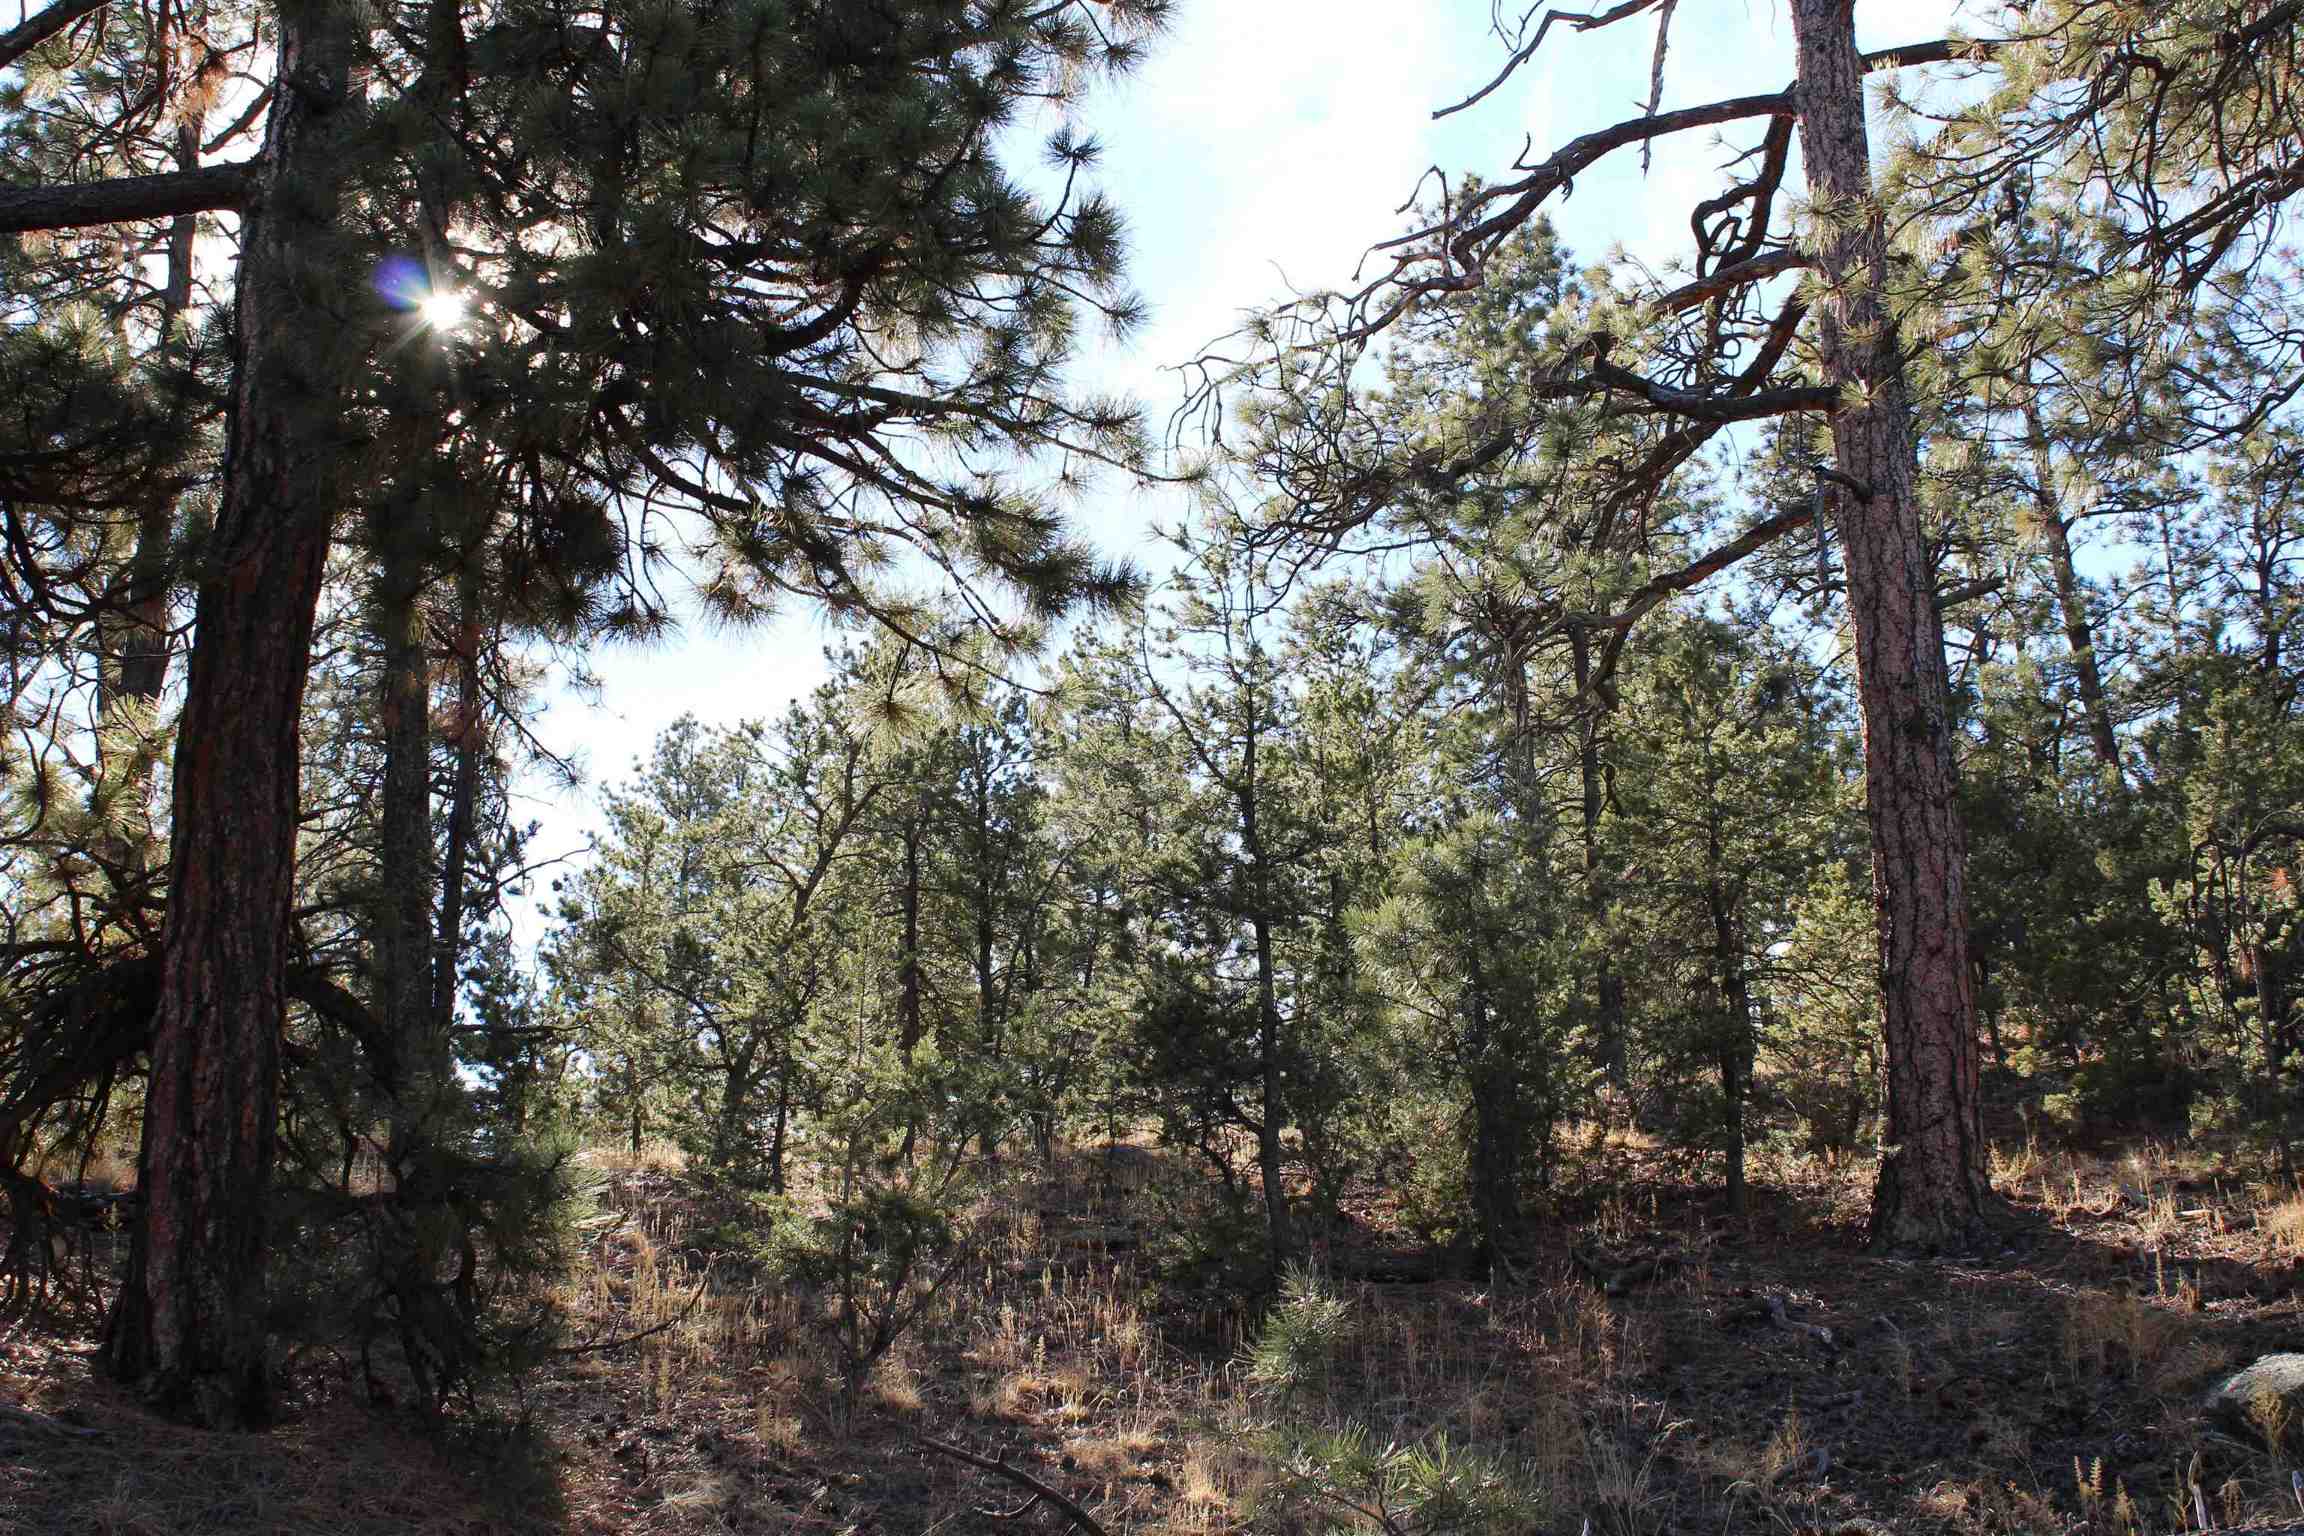 0 OVERLOOK, Santa Fe, New Mexico 87505, ,Land,For Sale,0 OVERLOOK,202105455